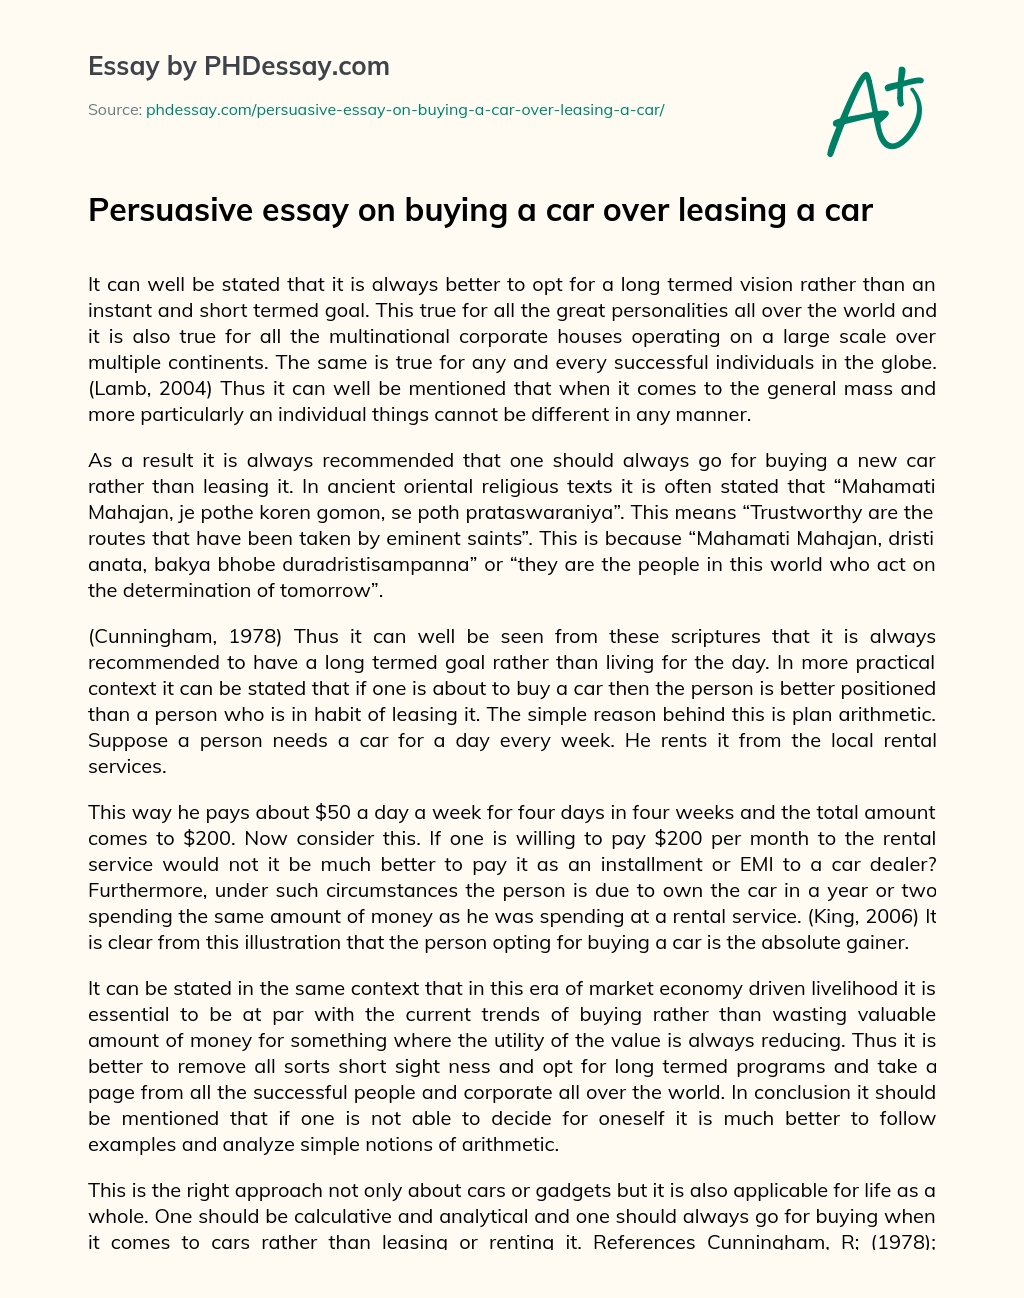 Persuasive essay on buying a car over leasing a car essay